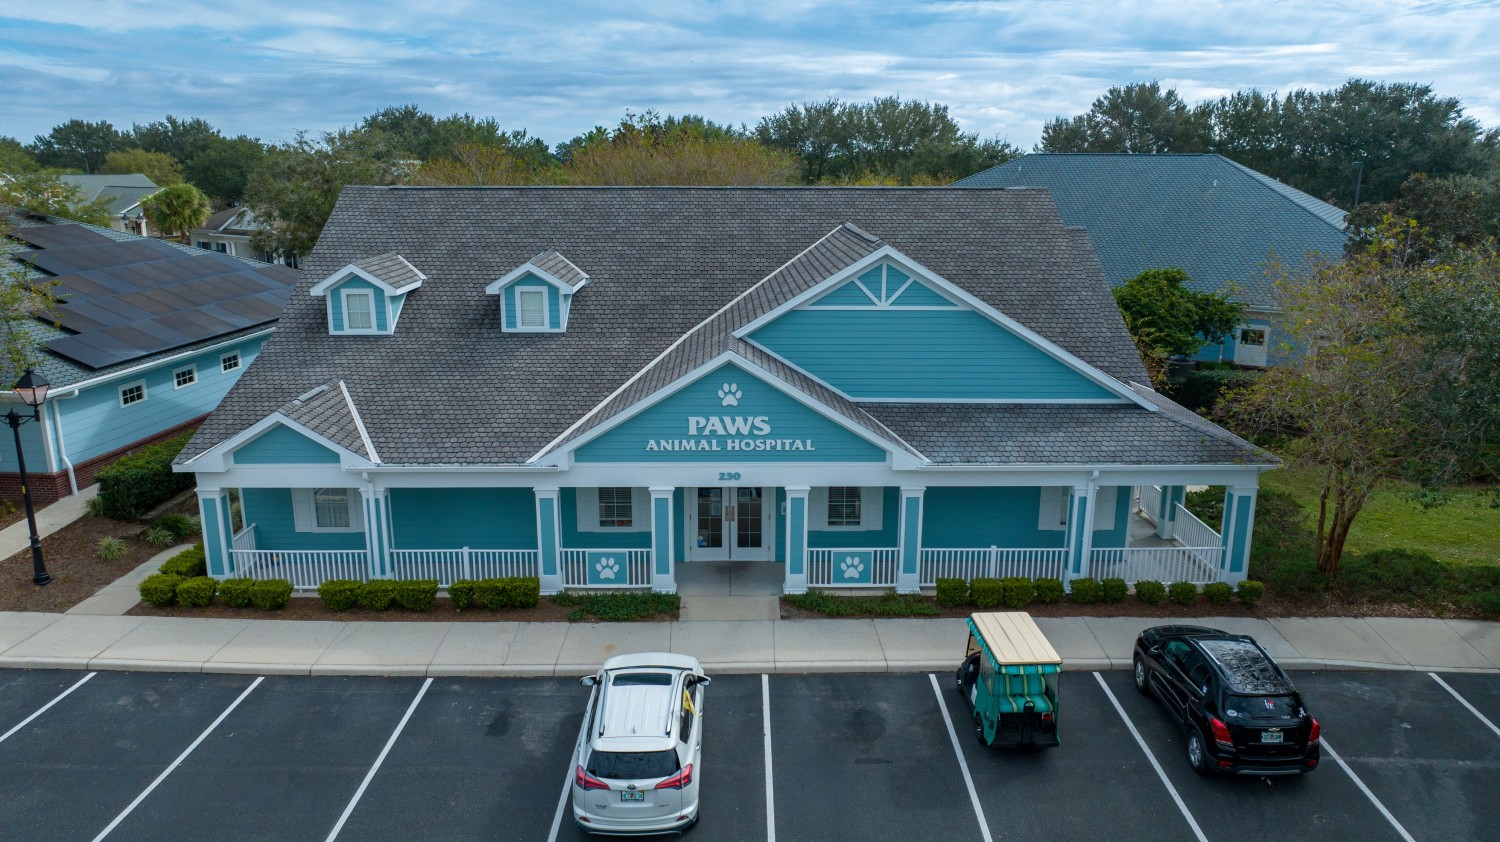 Our Building at Paws Animal Hospital